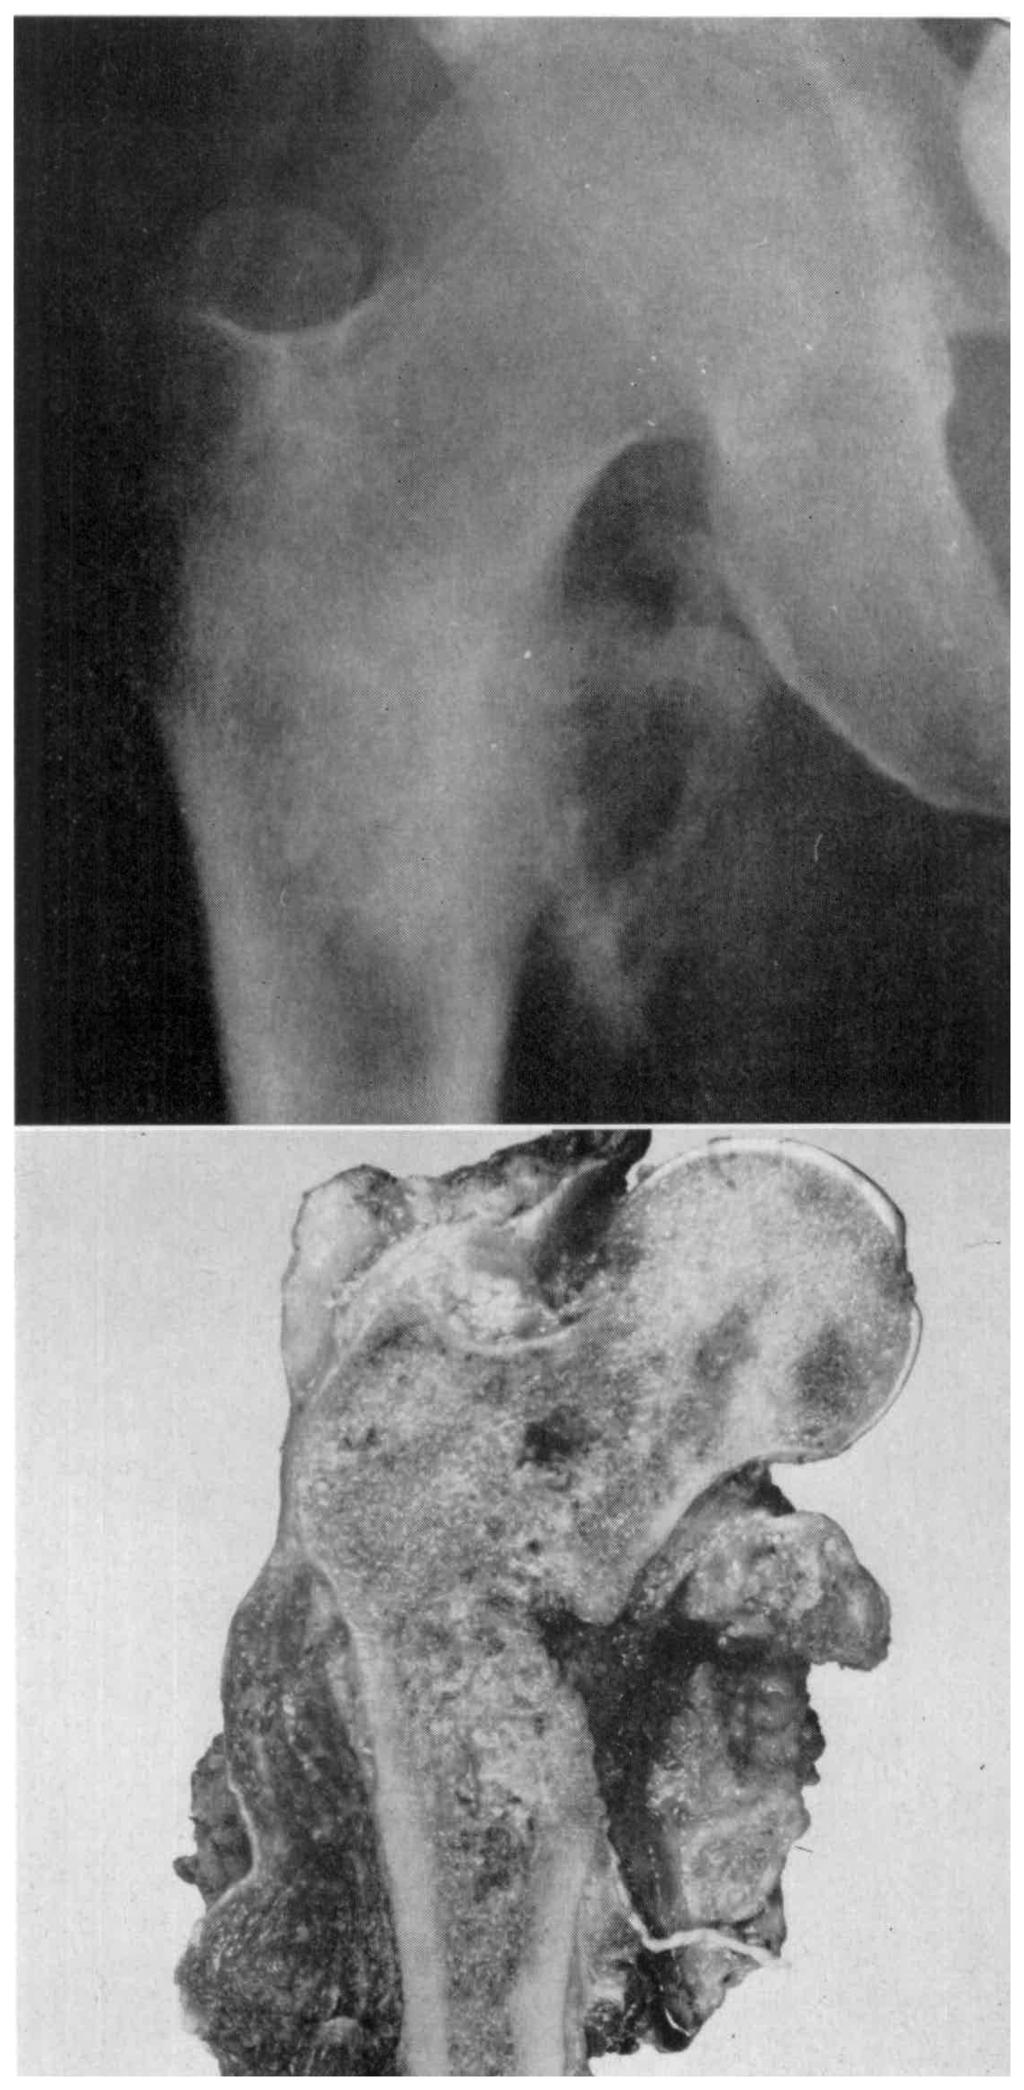 The lesser trochanter is destroyed, and extensive soft tissue calcification is present.